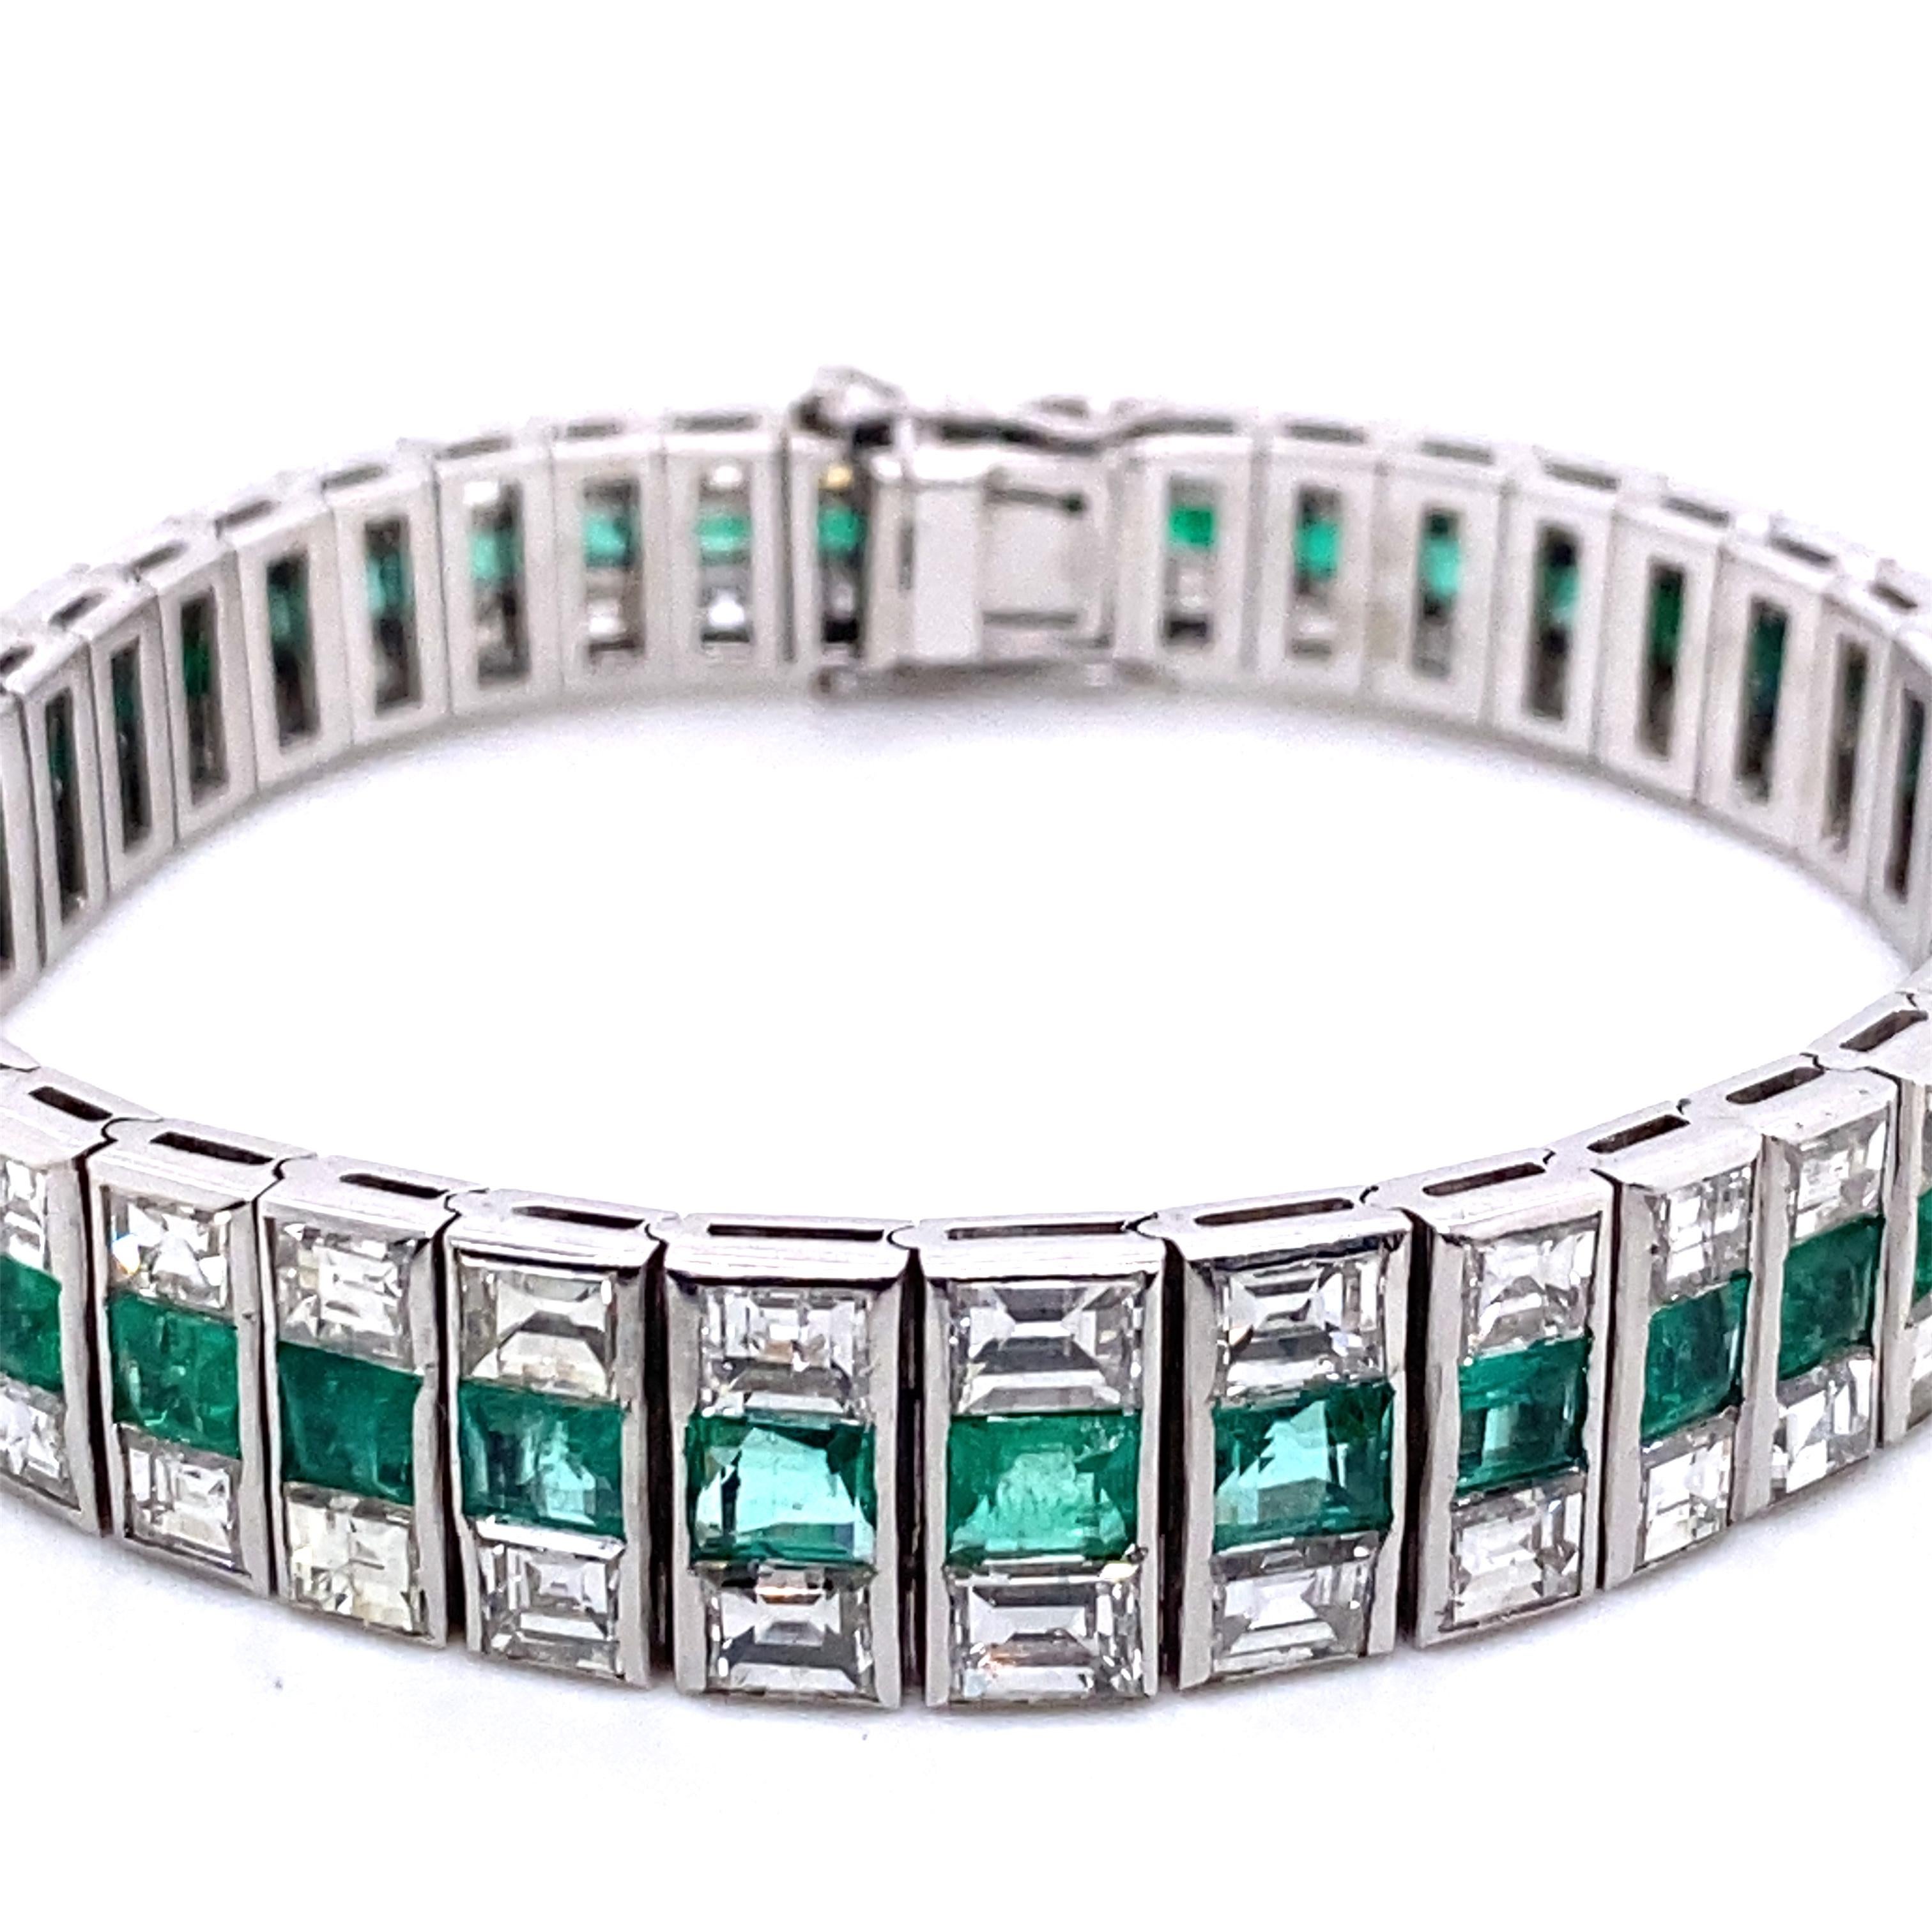 Dramatically elegant, this tennis bracelet features 16 carats of F/G VVS-rated diamonds and 22 carats of emeralds set in 18-karat white gold. 

It is 18 cm long. It was hand-made using traditional methods and designed and produced in Palermo, Sicily